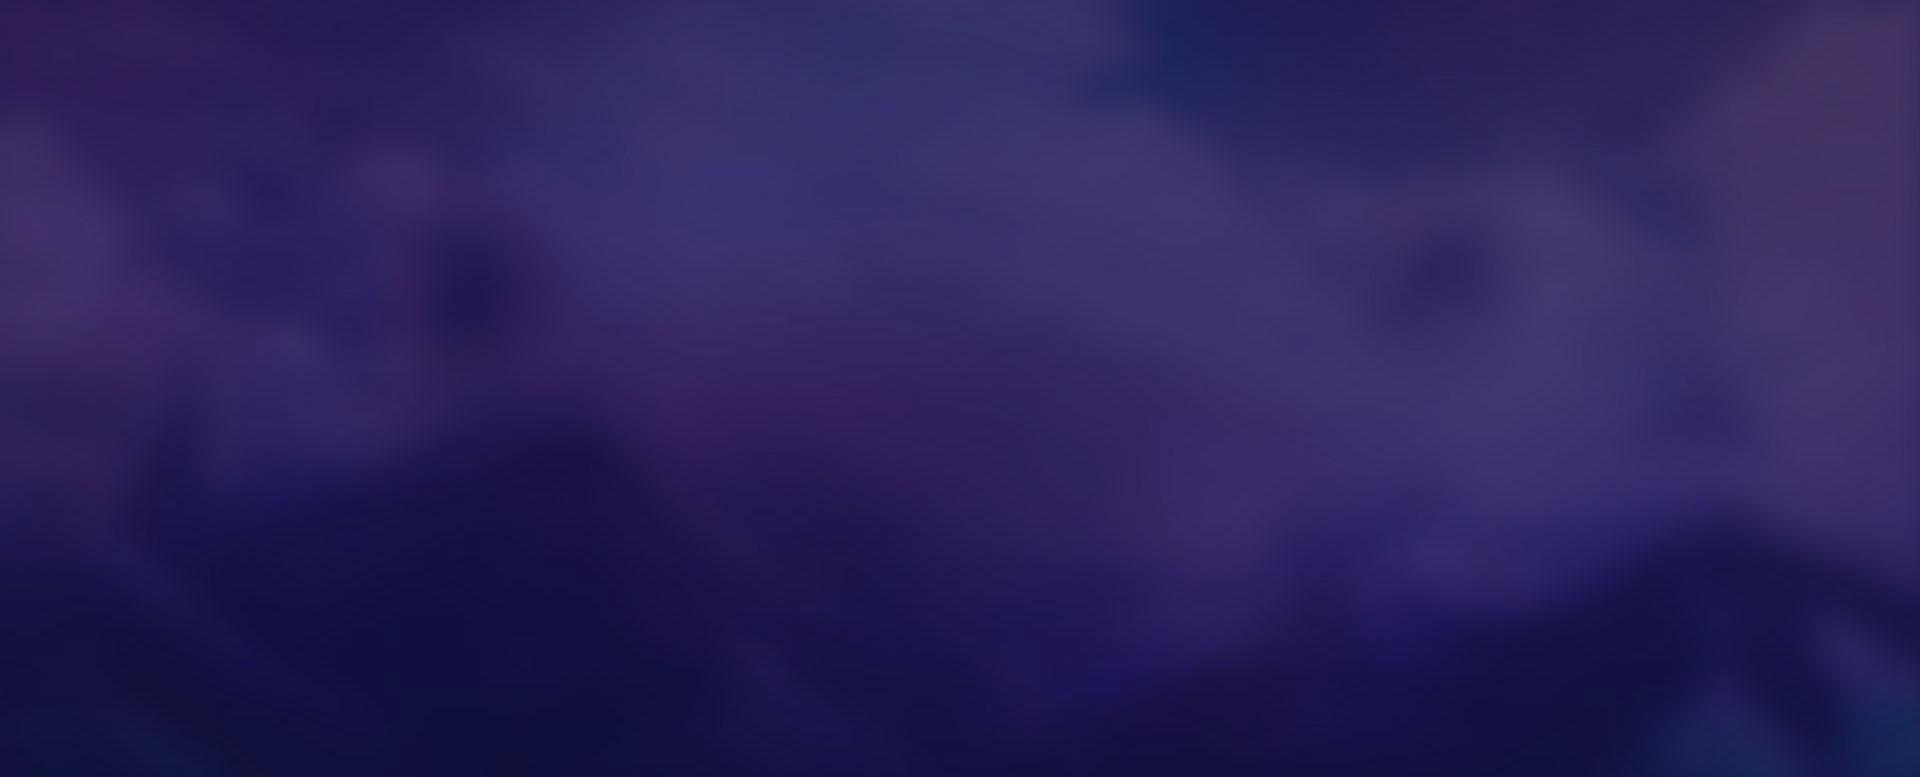 Wild Overlords background